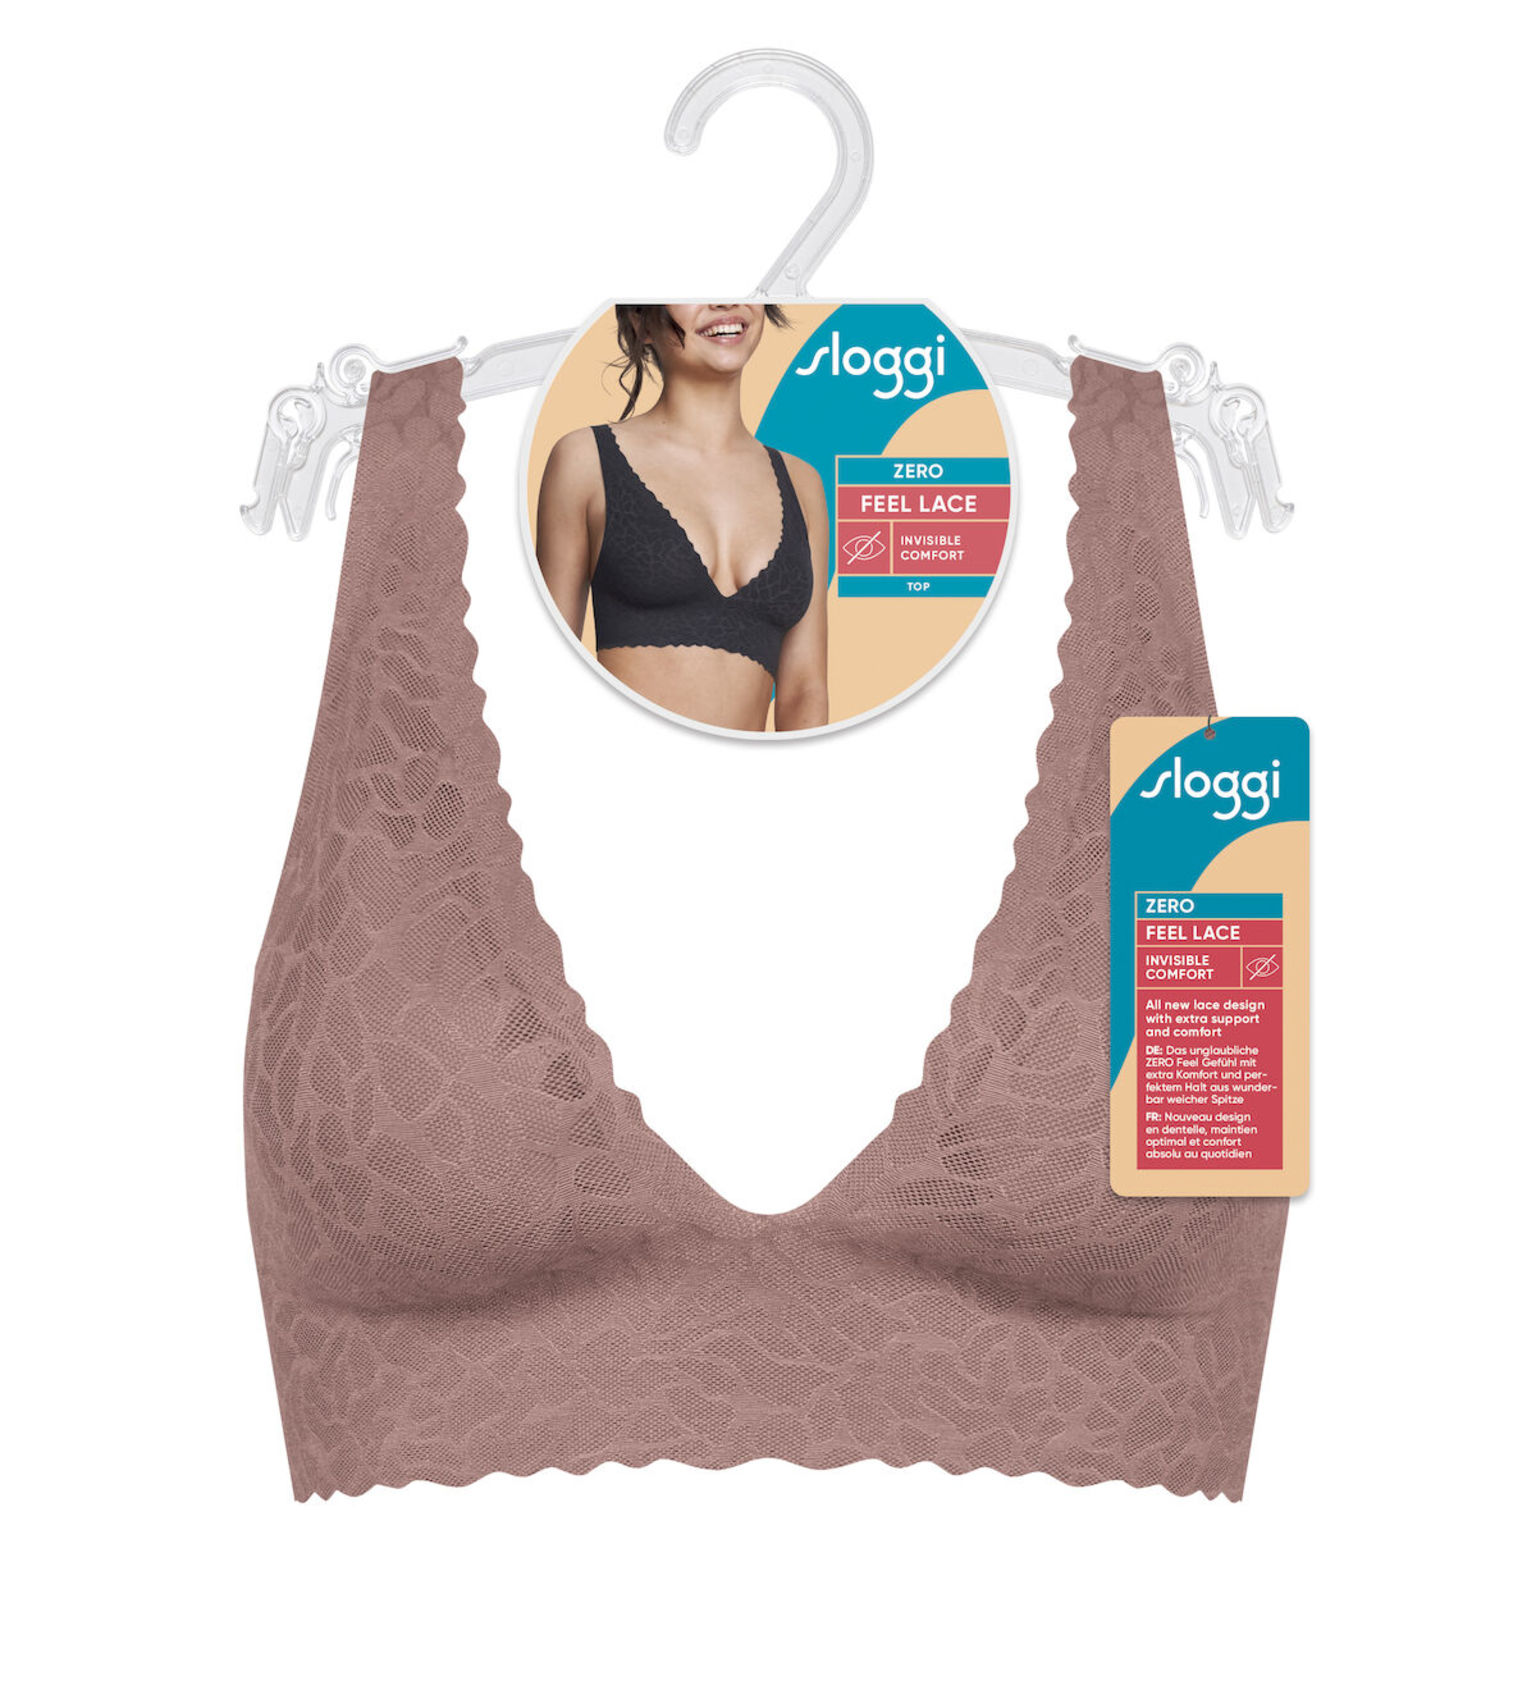 sloggi Zero Feel Lace 2.0 Bralette - Everyday base layer Women's, Product  Review